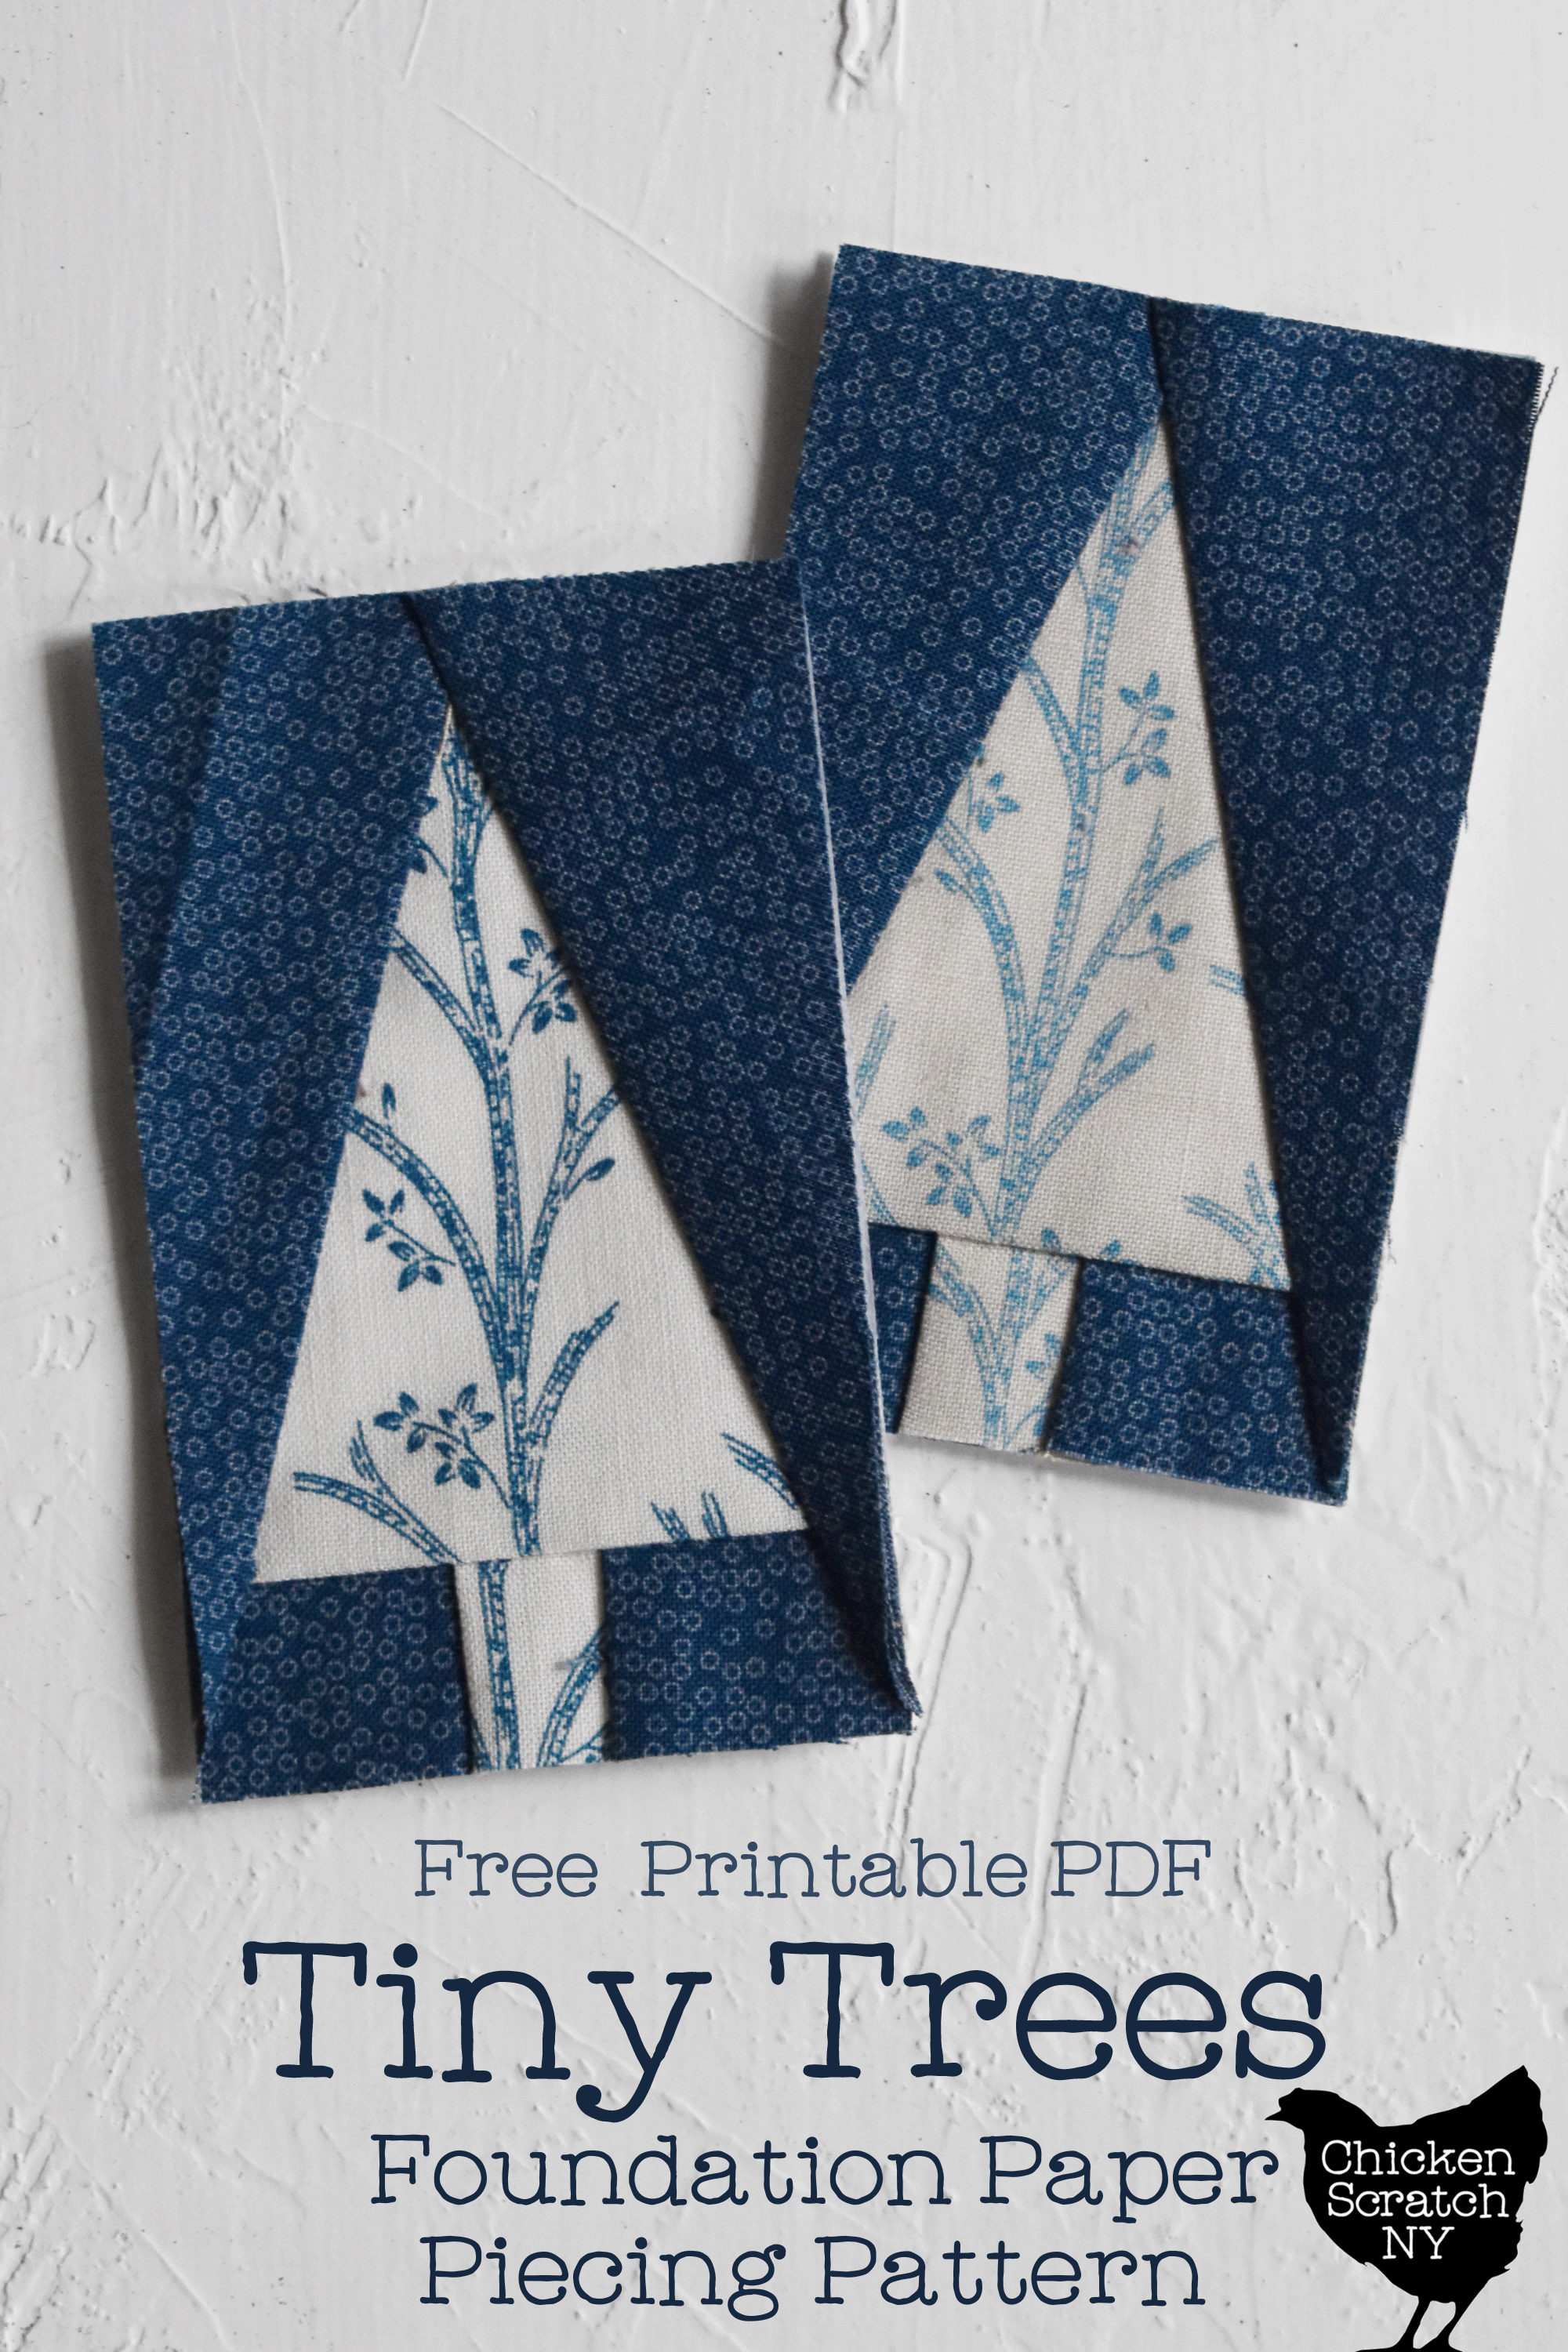 two small pine tree foundation paper pieced blocks made with blue and white fabric with text overlay "Free Printable PDF Tiny Trees Foundation Paper Piecing Pattern"